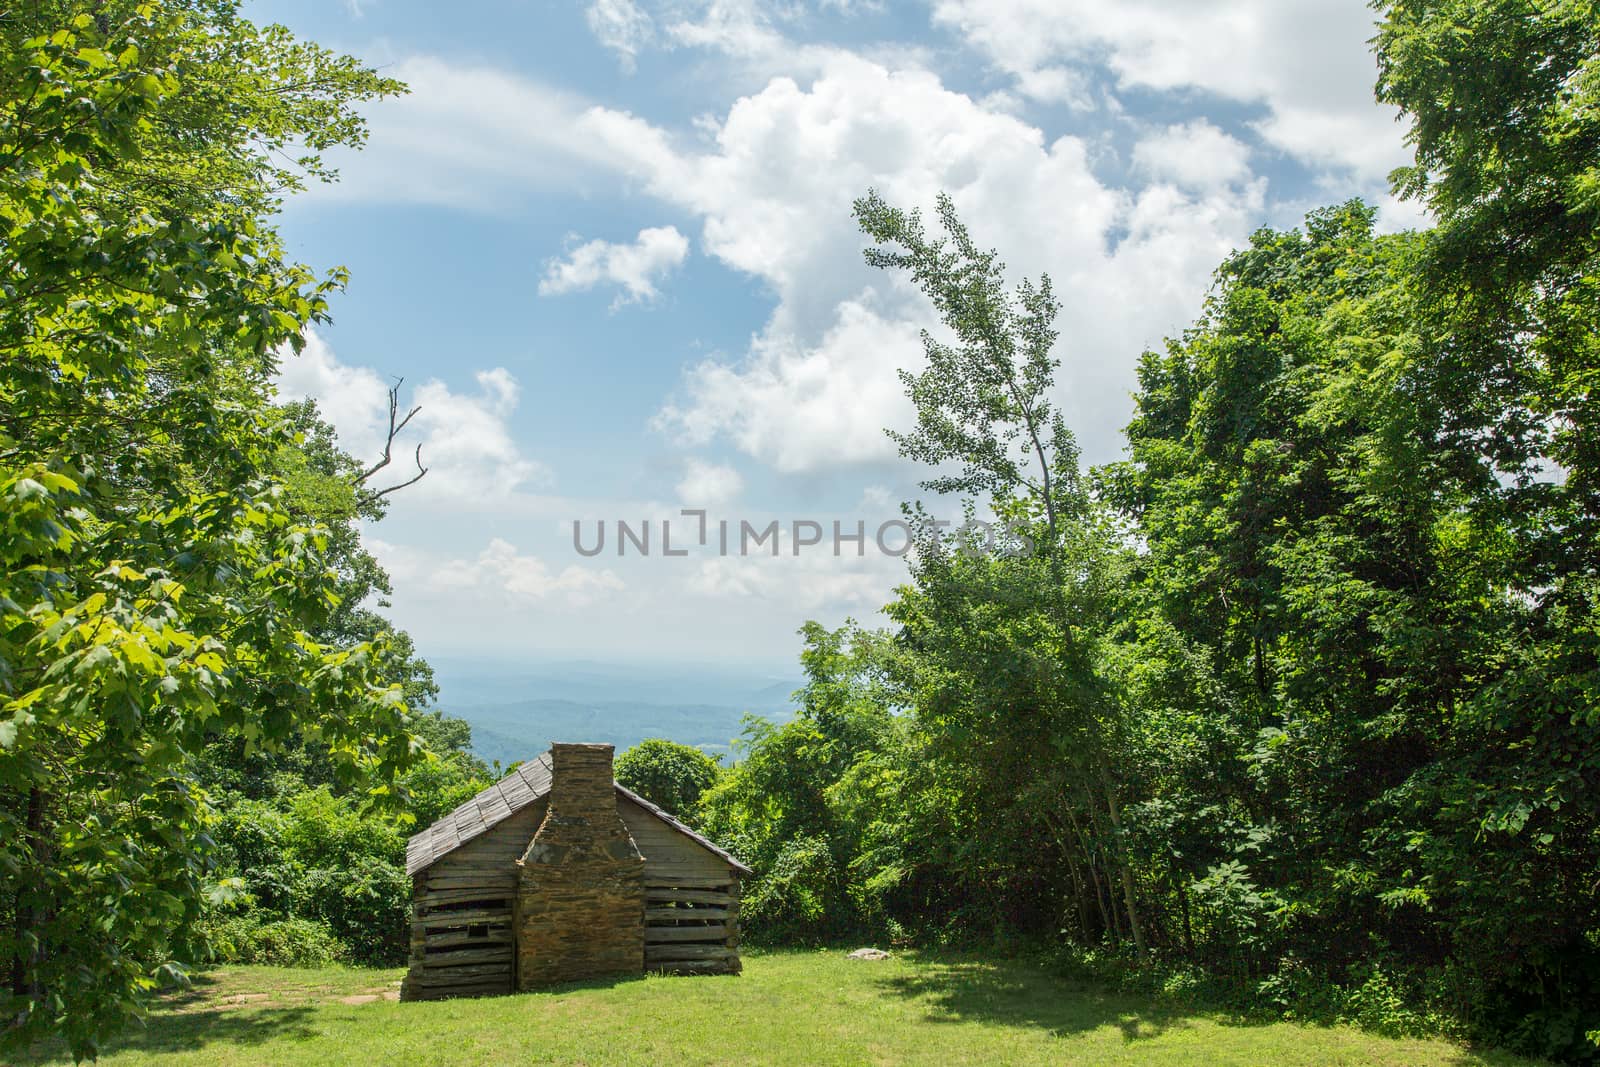 A view of a cabin in the foothills of the Blue Ridge Mountains in Franklin County, Virginia